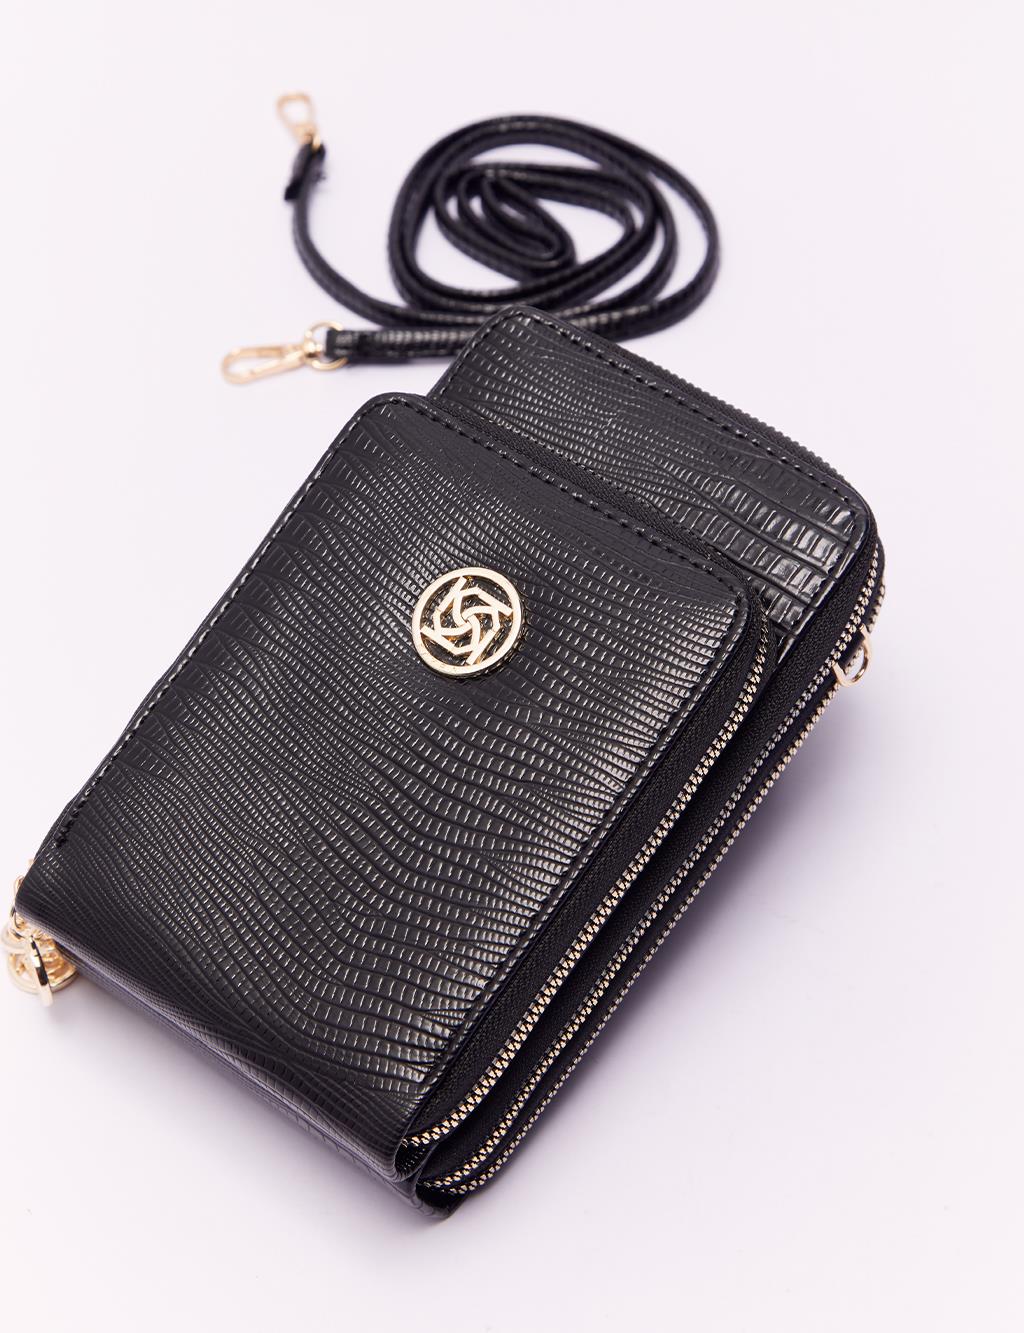 Three Compartments Iguana Leather Wallet Bag Black